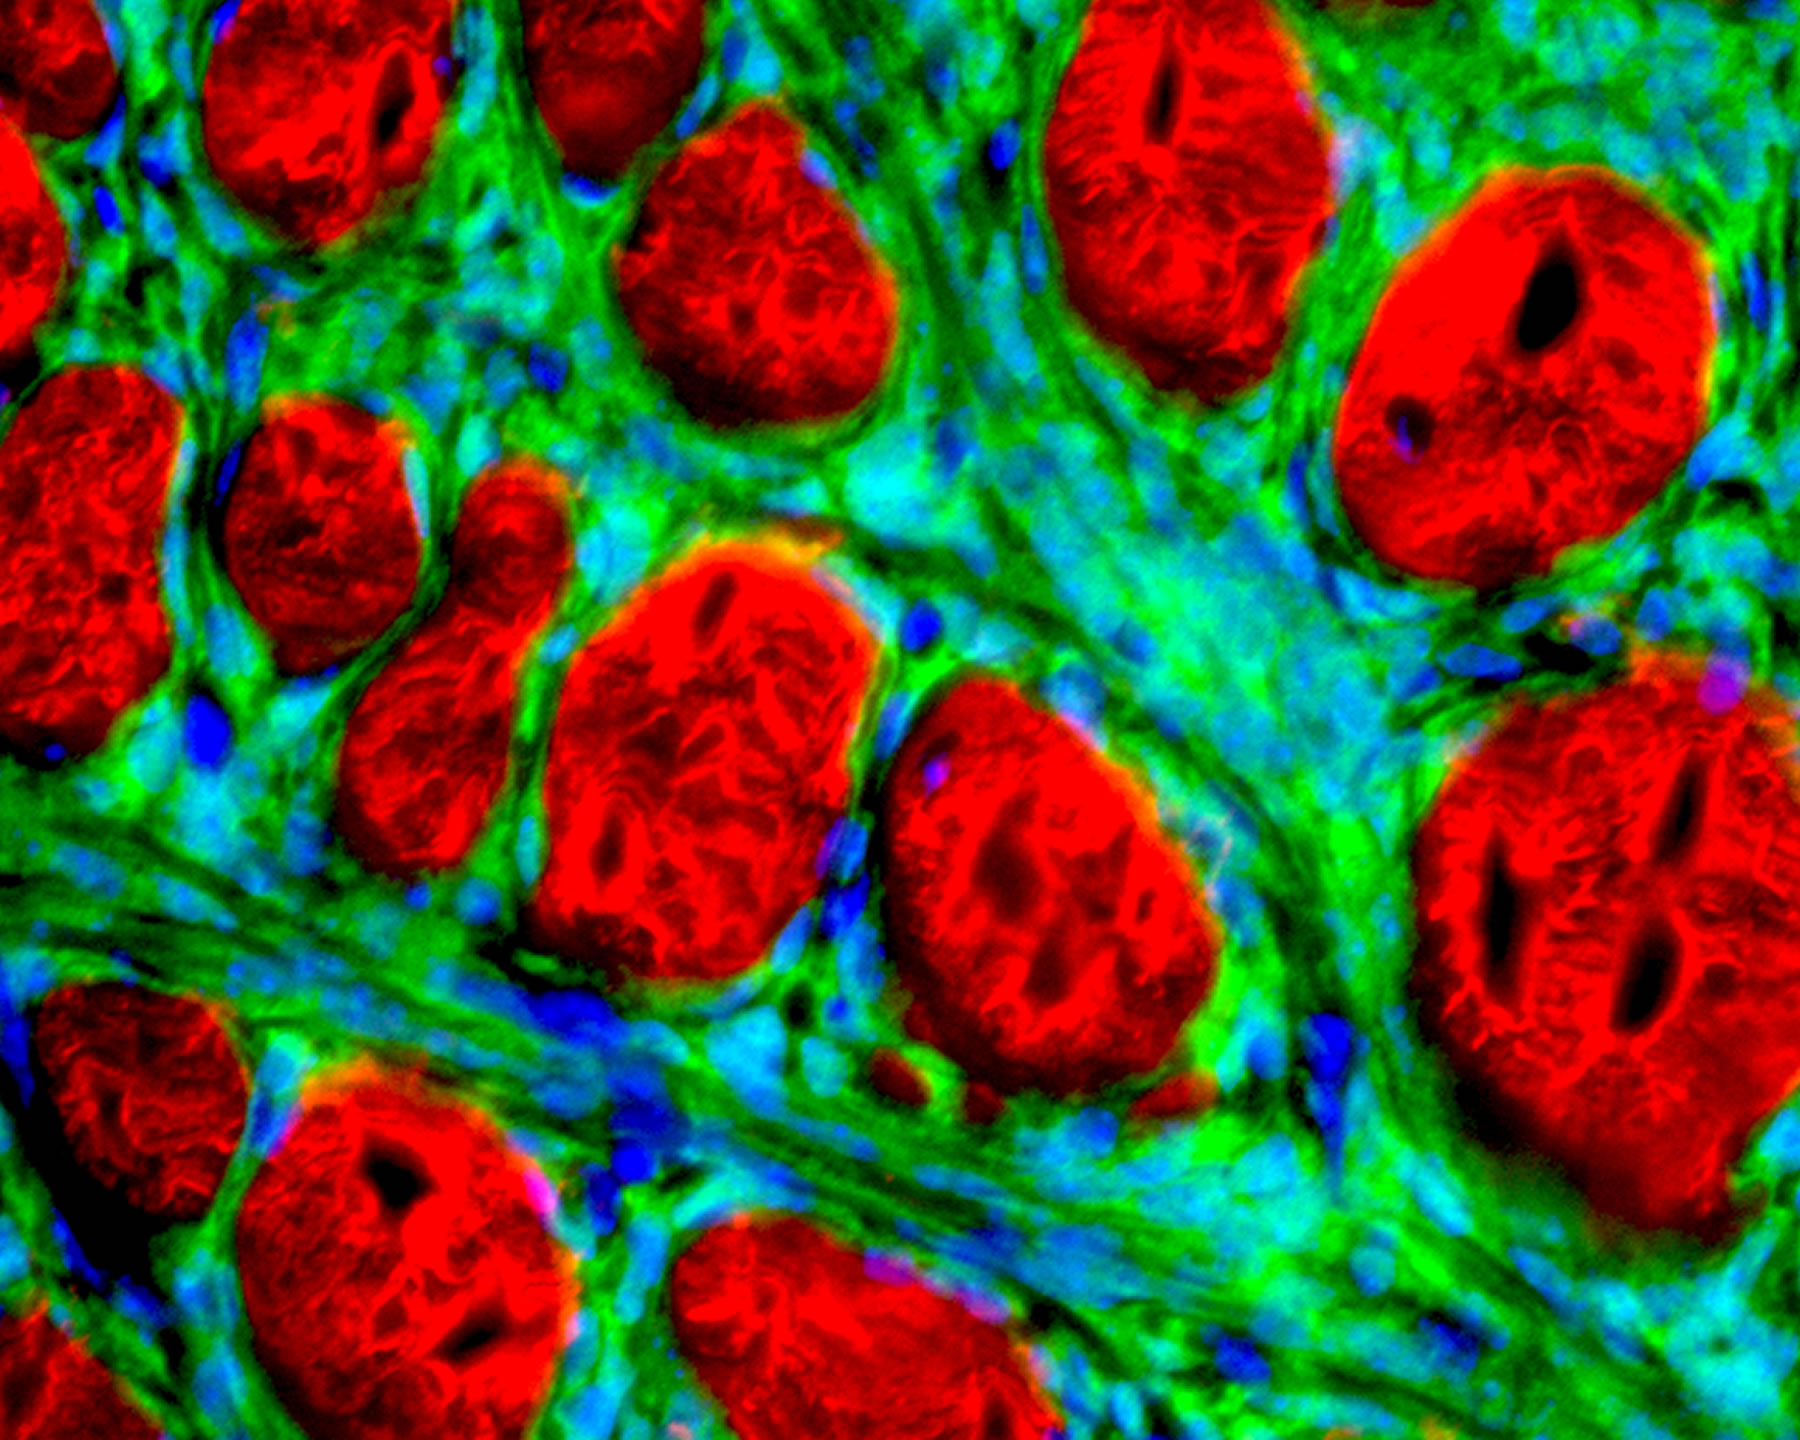 University of Utah researchers have engineered a mouse that can develop synovial sarcoma, an aggressive and often lethal human cancer that most frequently afflicts teenagers and young adults. The mouse "model" for the human cancer not only should speed the search for new treatments, but revealed the cancer originates in muscle precursor cells called myoblasts. The photo shows a microscopic, cross-section view of part of a synovial sarcoma tumor. The cancerous cells are green and developed from myoblasts. They surround red-colored muscle fibers. Cell nuclei are blue, and the cancer cell nuclei are particularly visible.